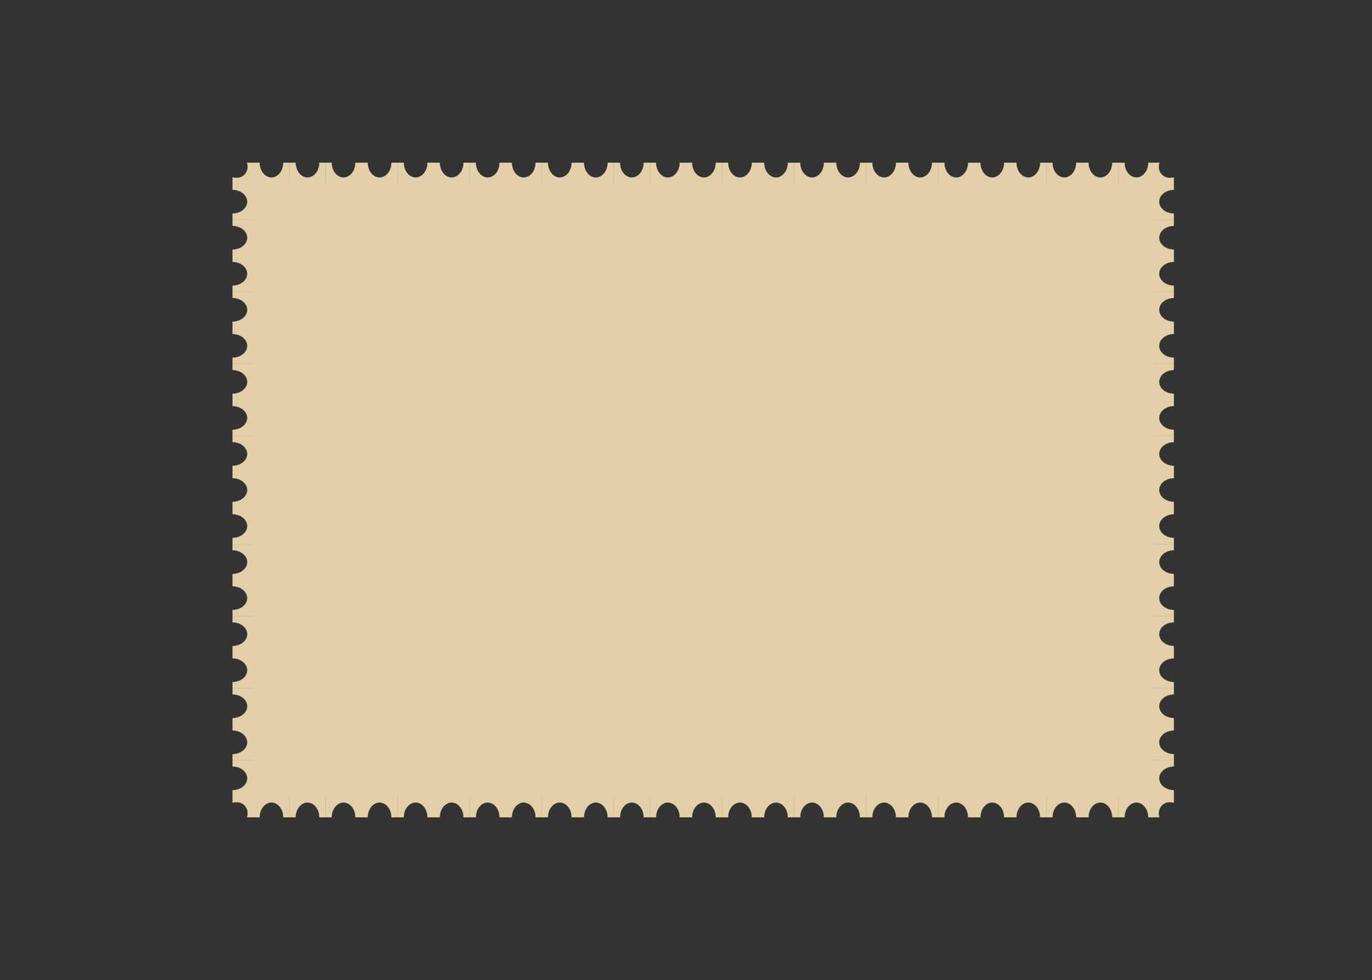 Postage stamp frame. Empty border template for postcards and letters. Blank rectangle and square postage stamp with perforated edge. Vector illustration isolated on black background